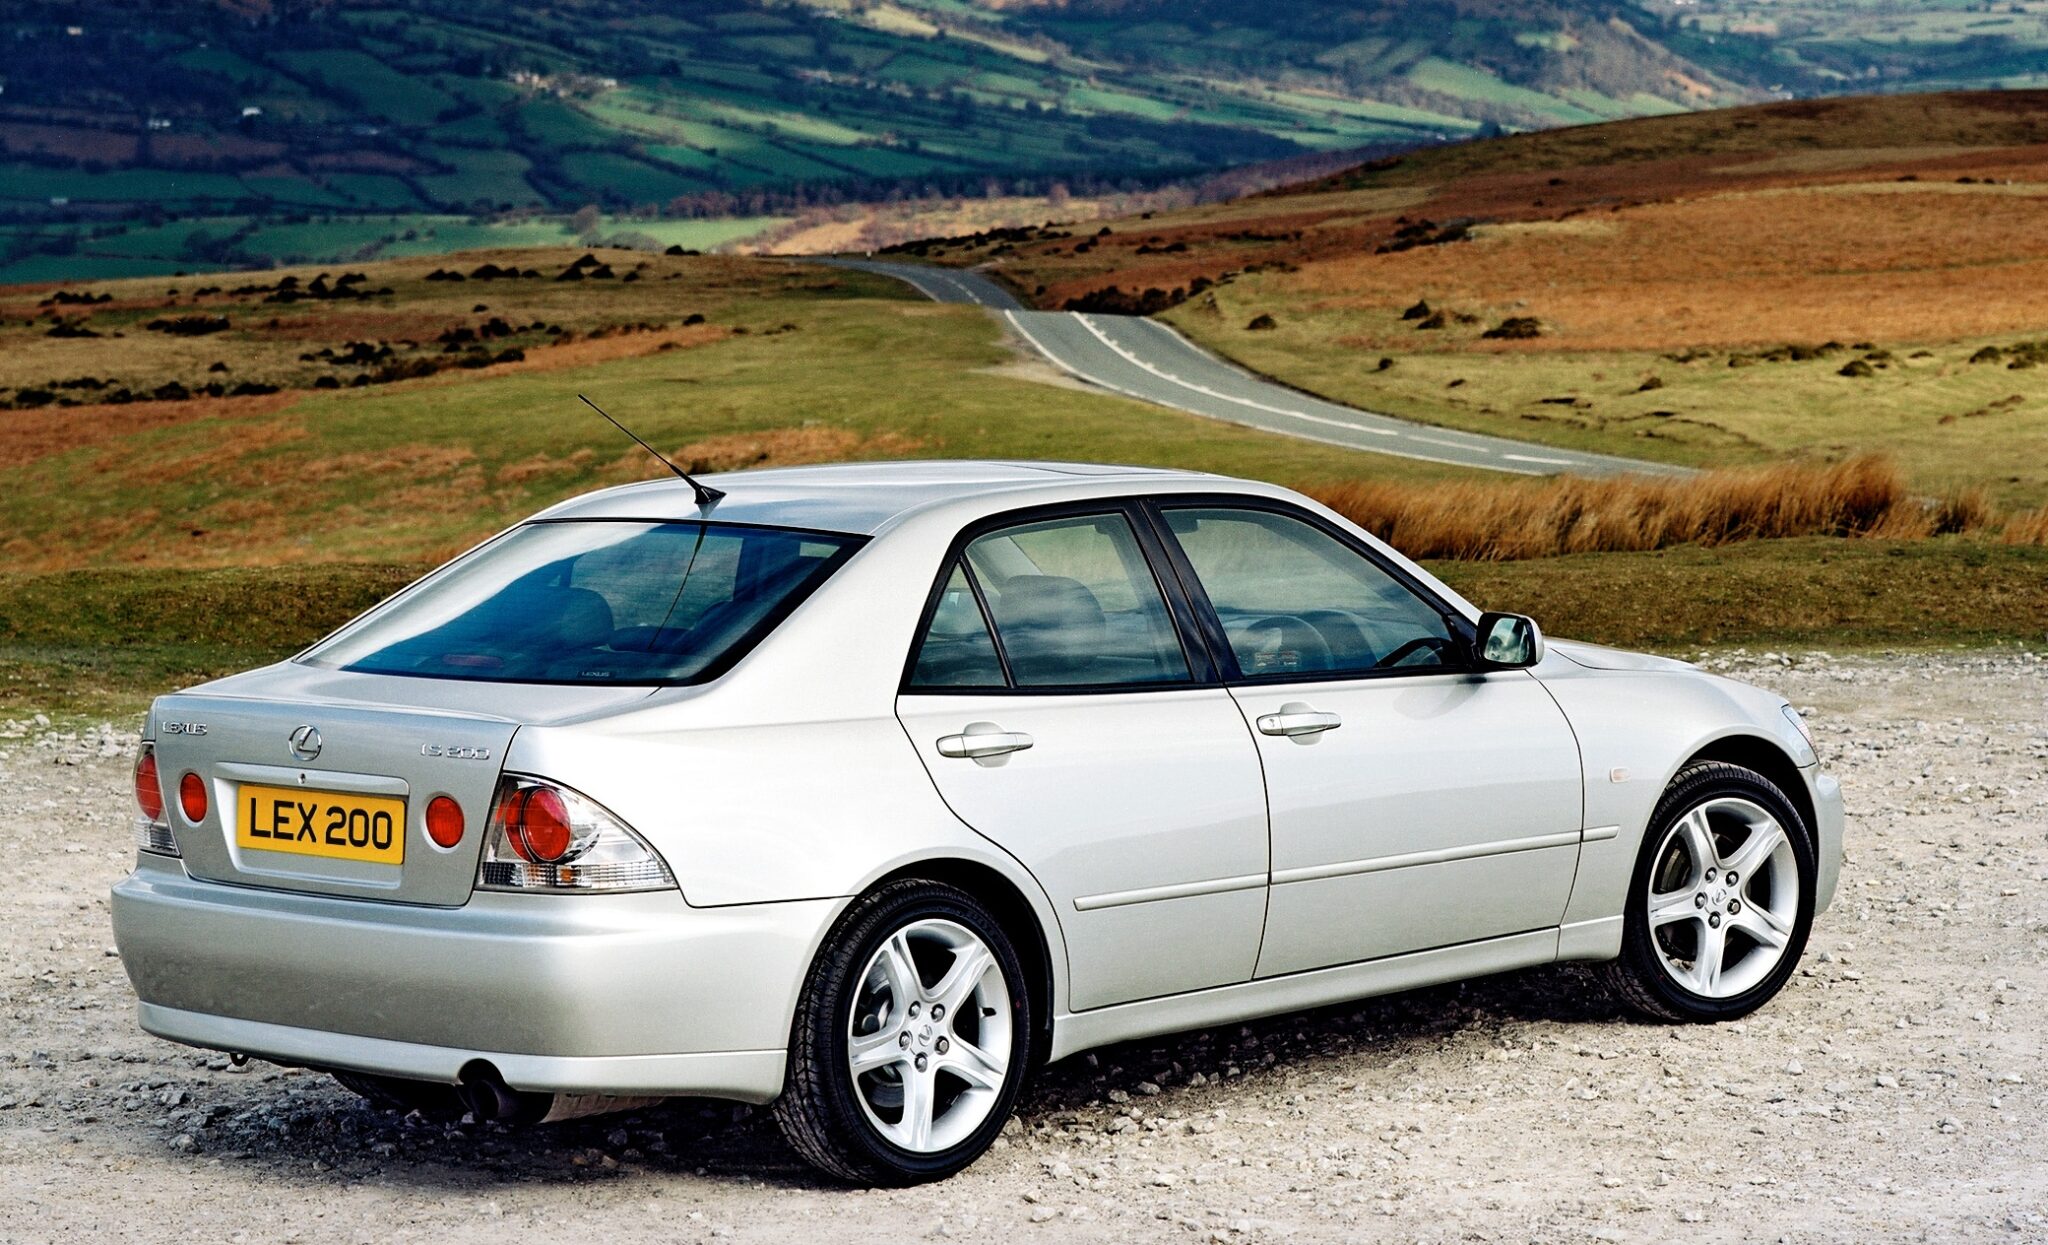 The Nissan Almera - Not exciting, but does the job 